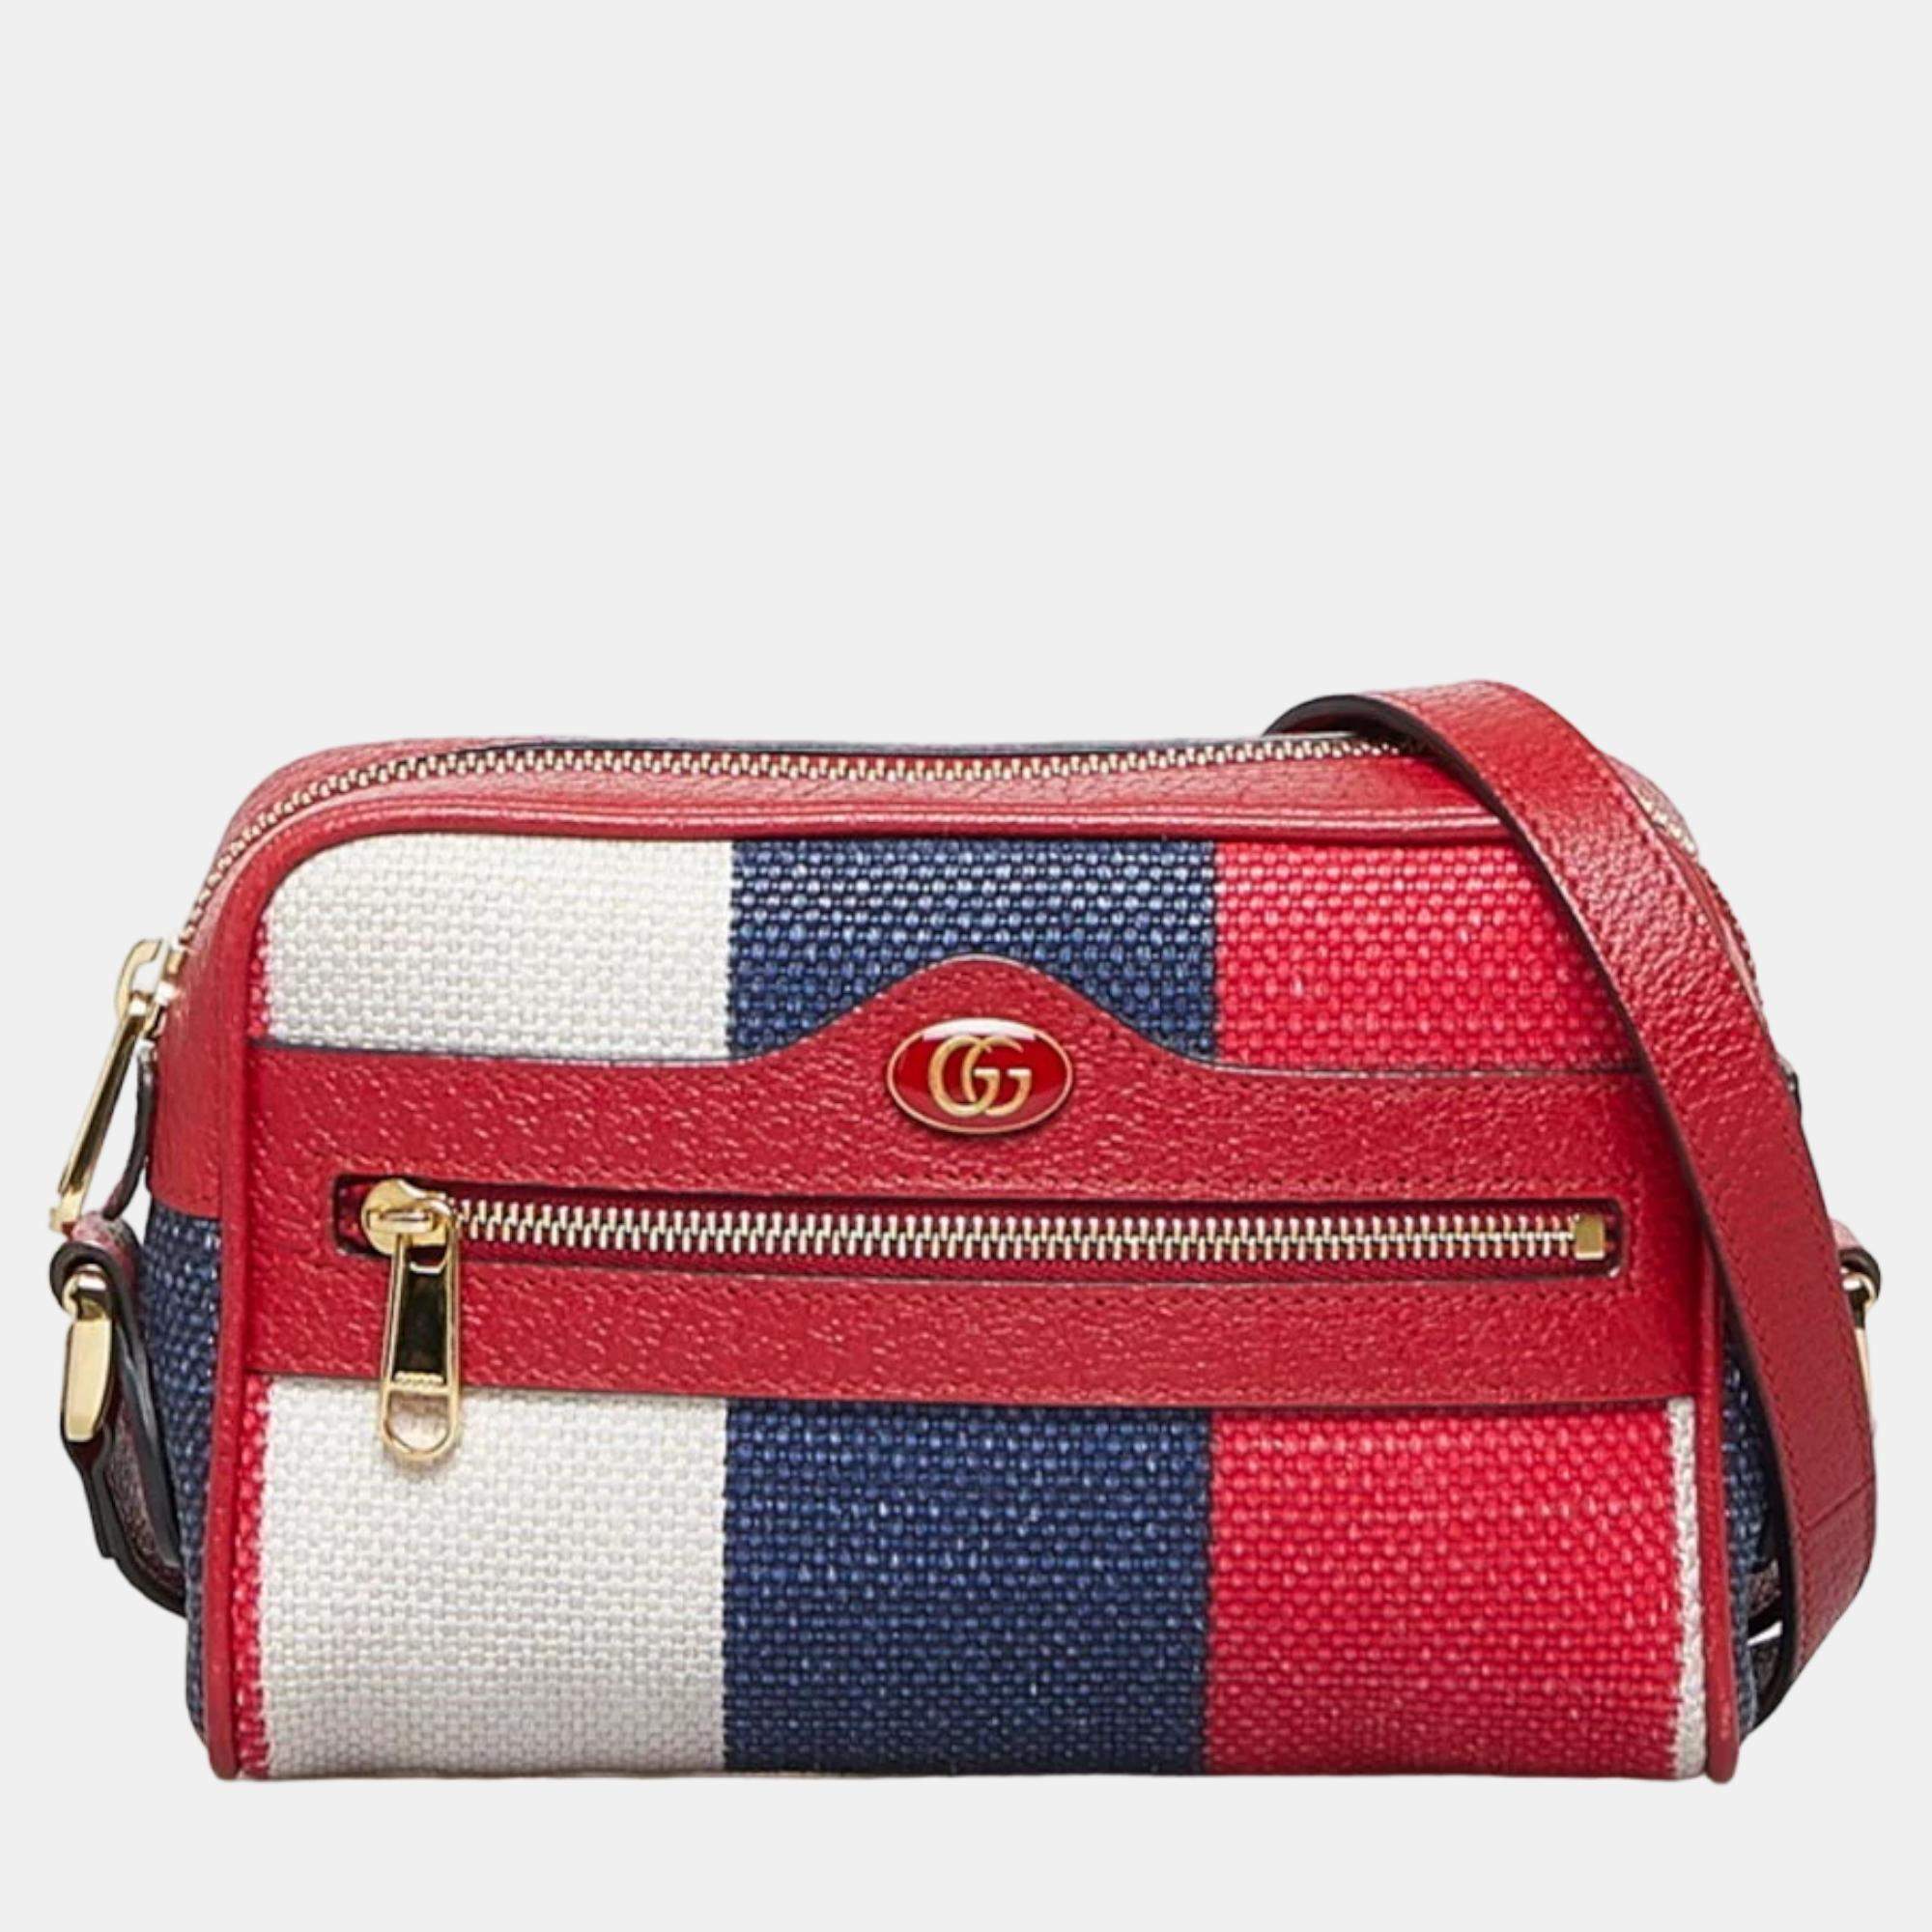 Gucci Ophidia Bags & Handbags for Women, Authenticity Guaranteed